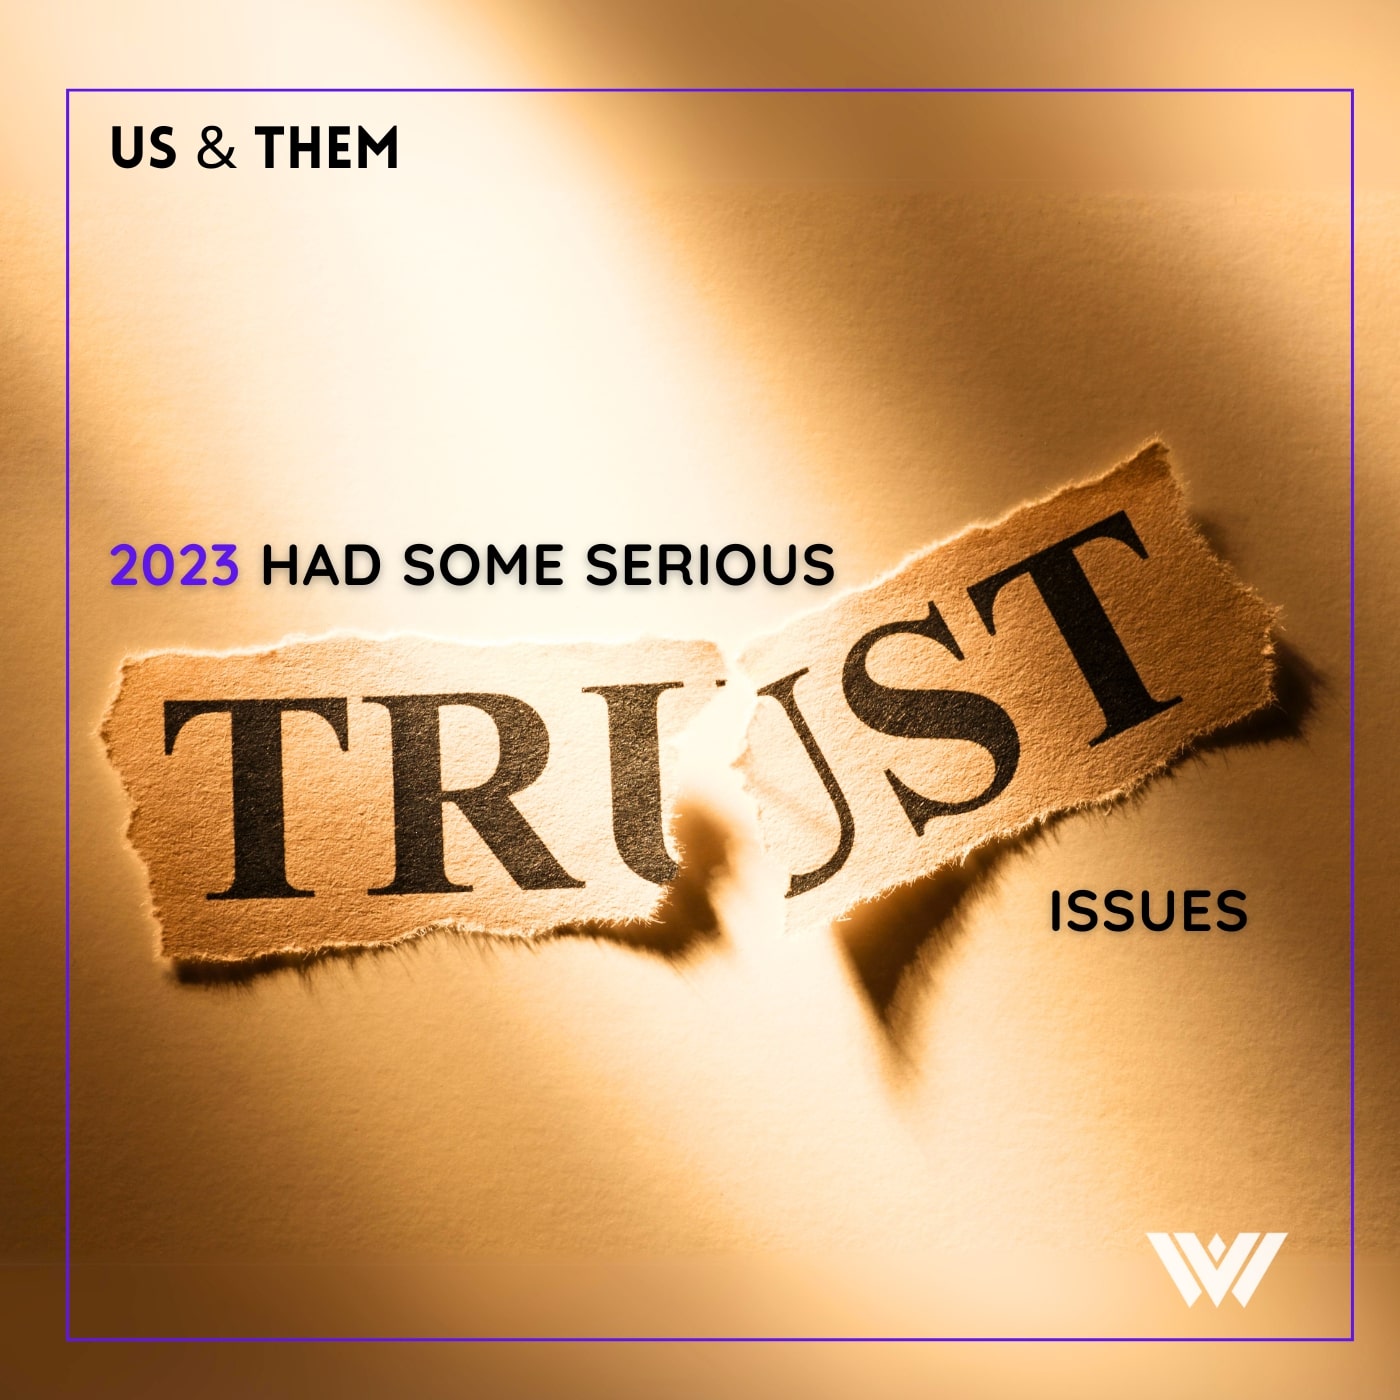 Us & Them: 2023 Had Some Serious Trust Issues